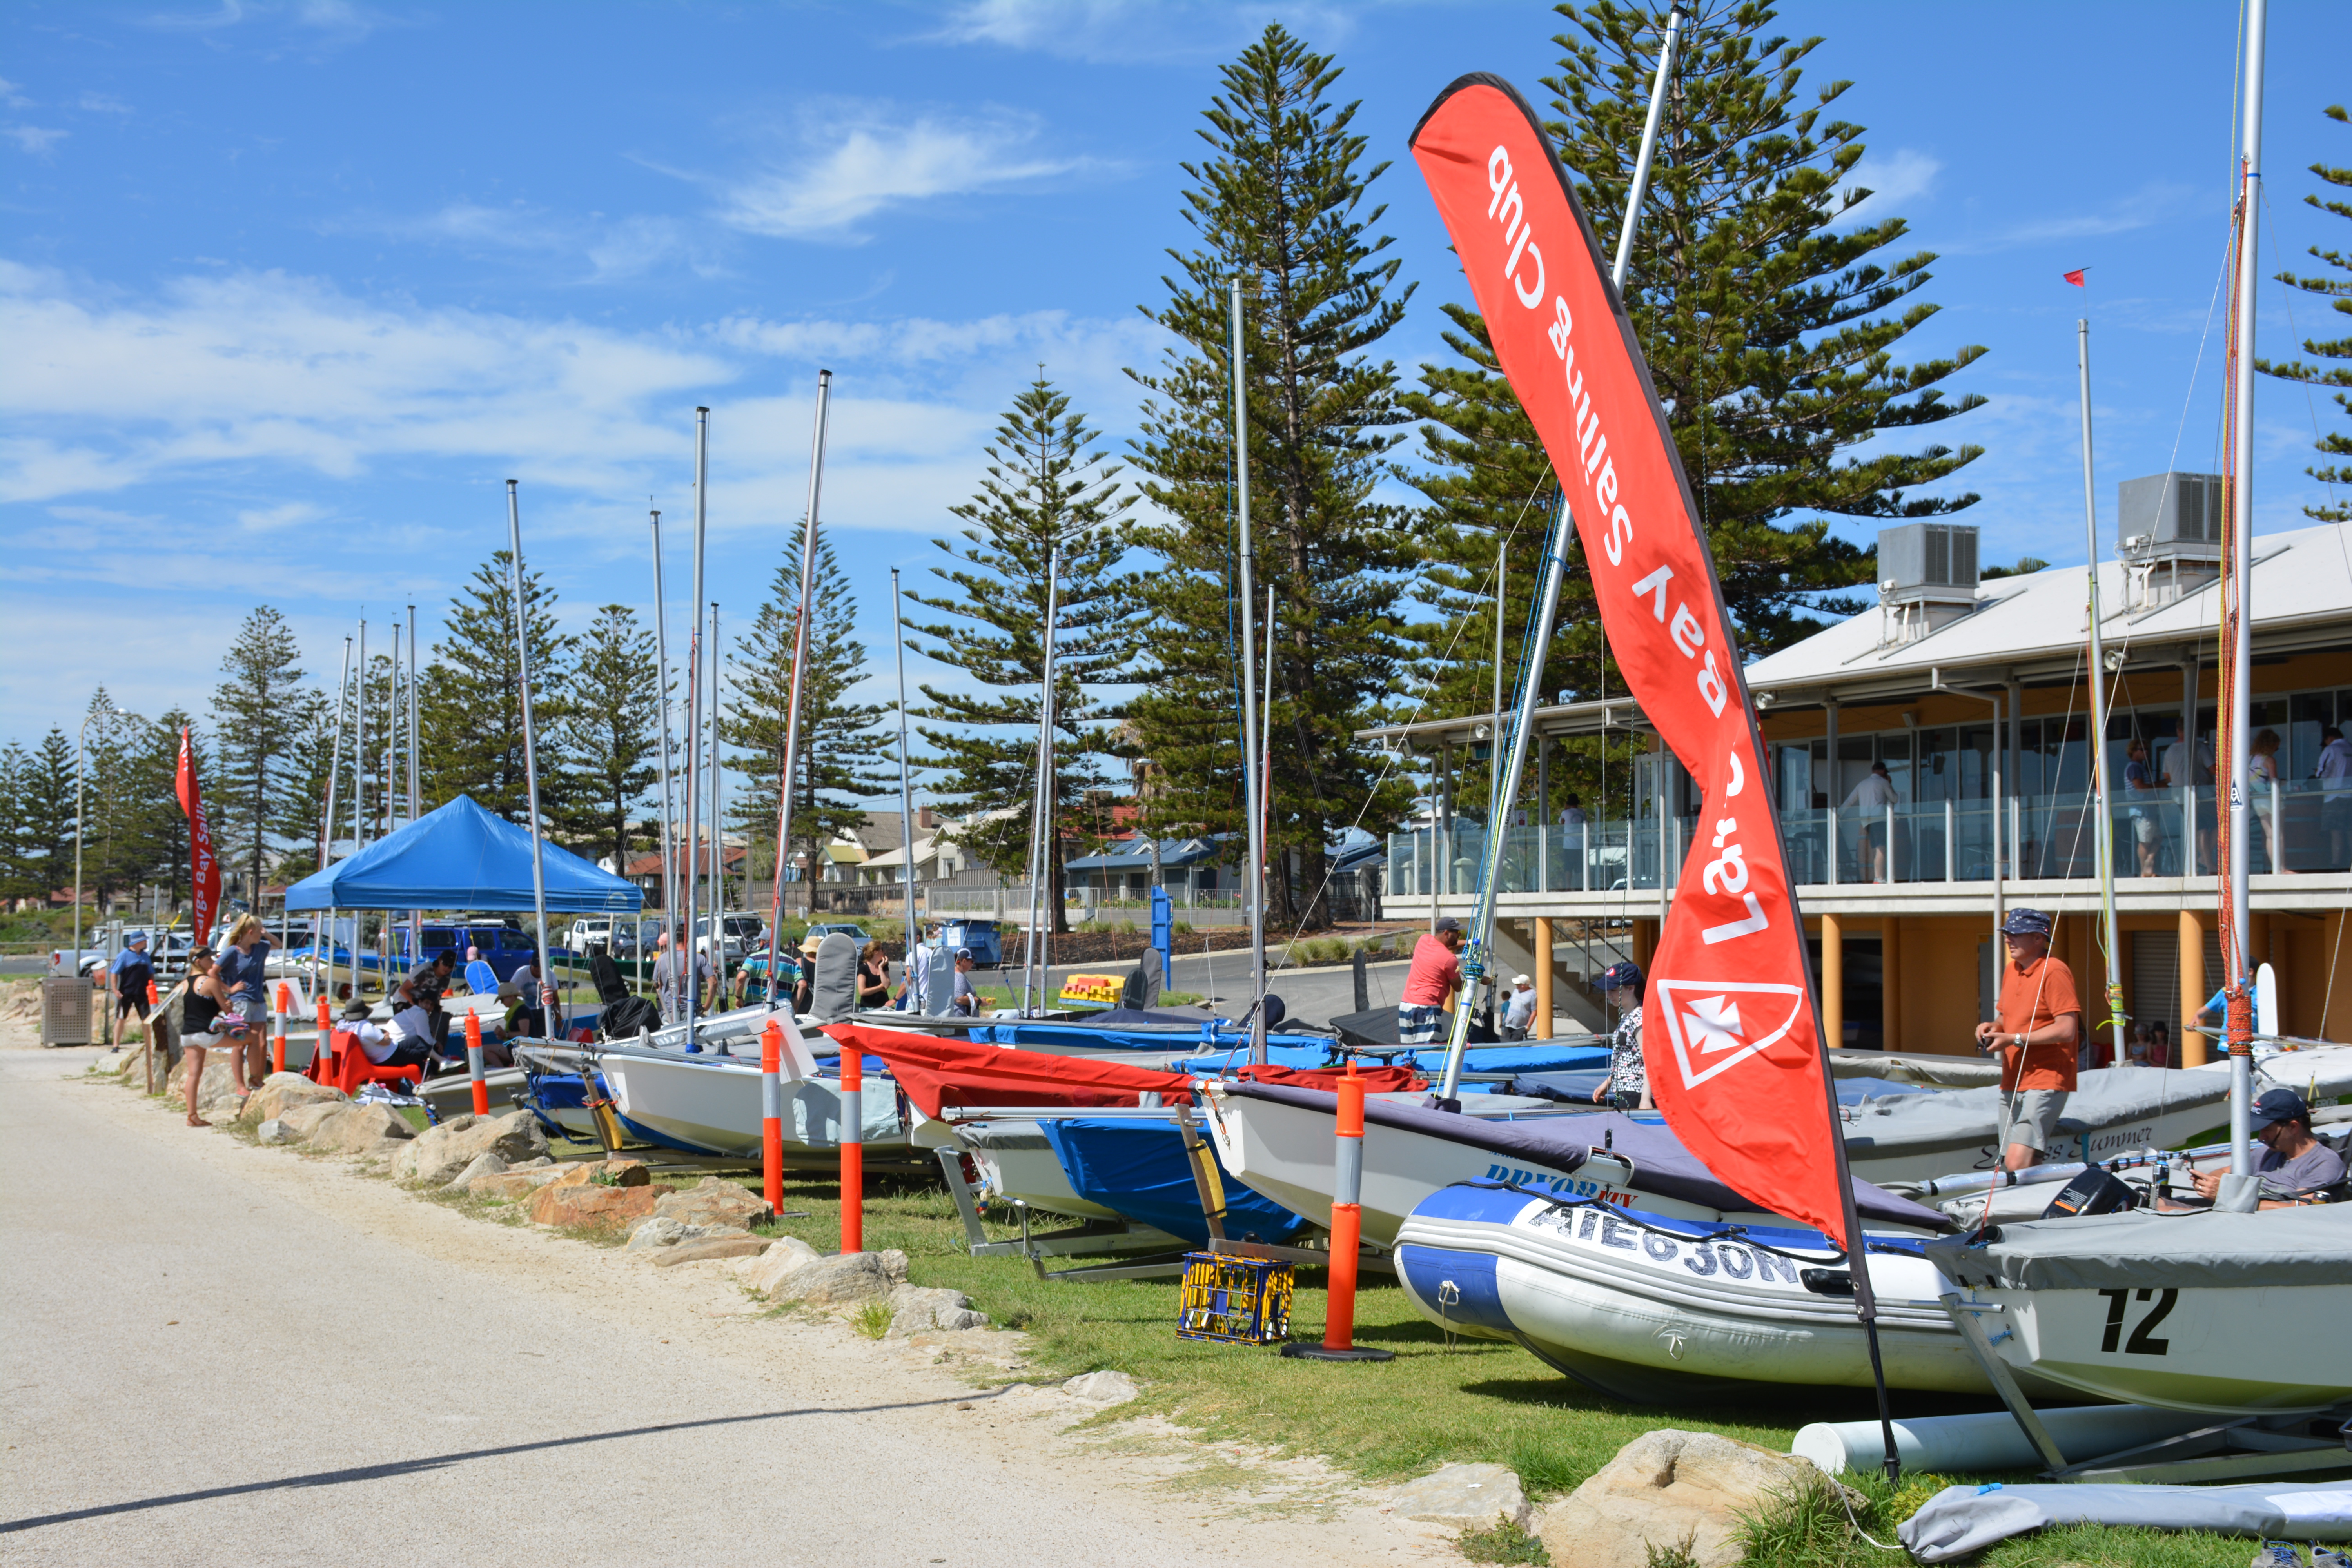 A total of 82 boats competed at the recent Australian Championships, hosted by the Largs Bay Sailing Club. Photo: Down Under Sail